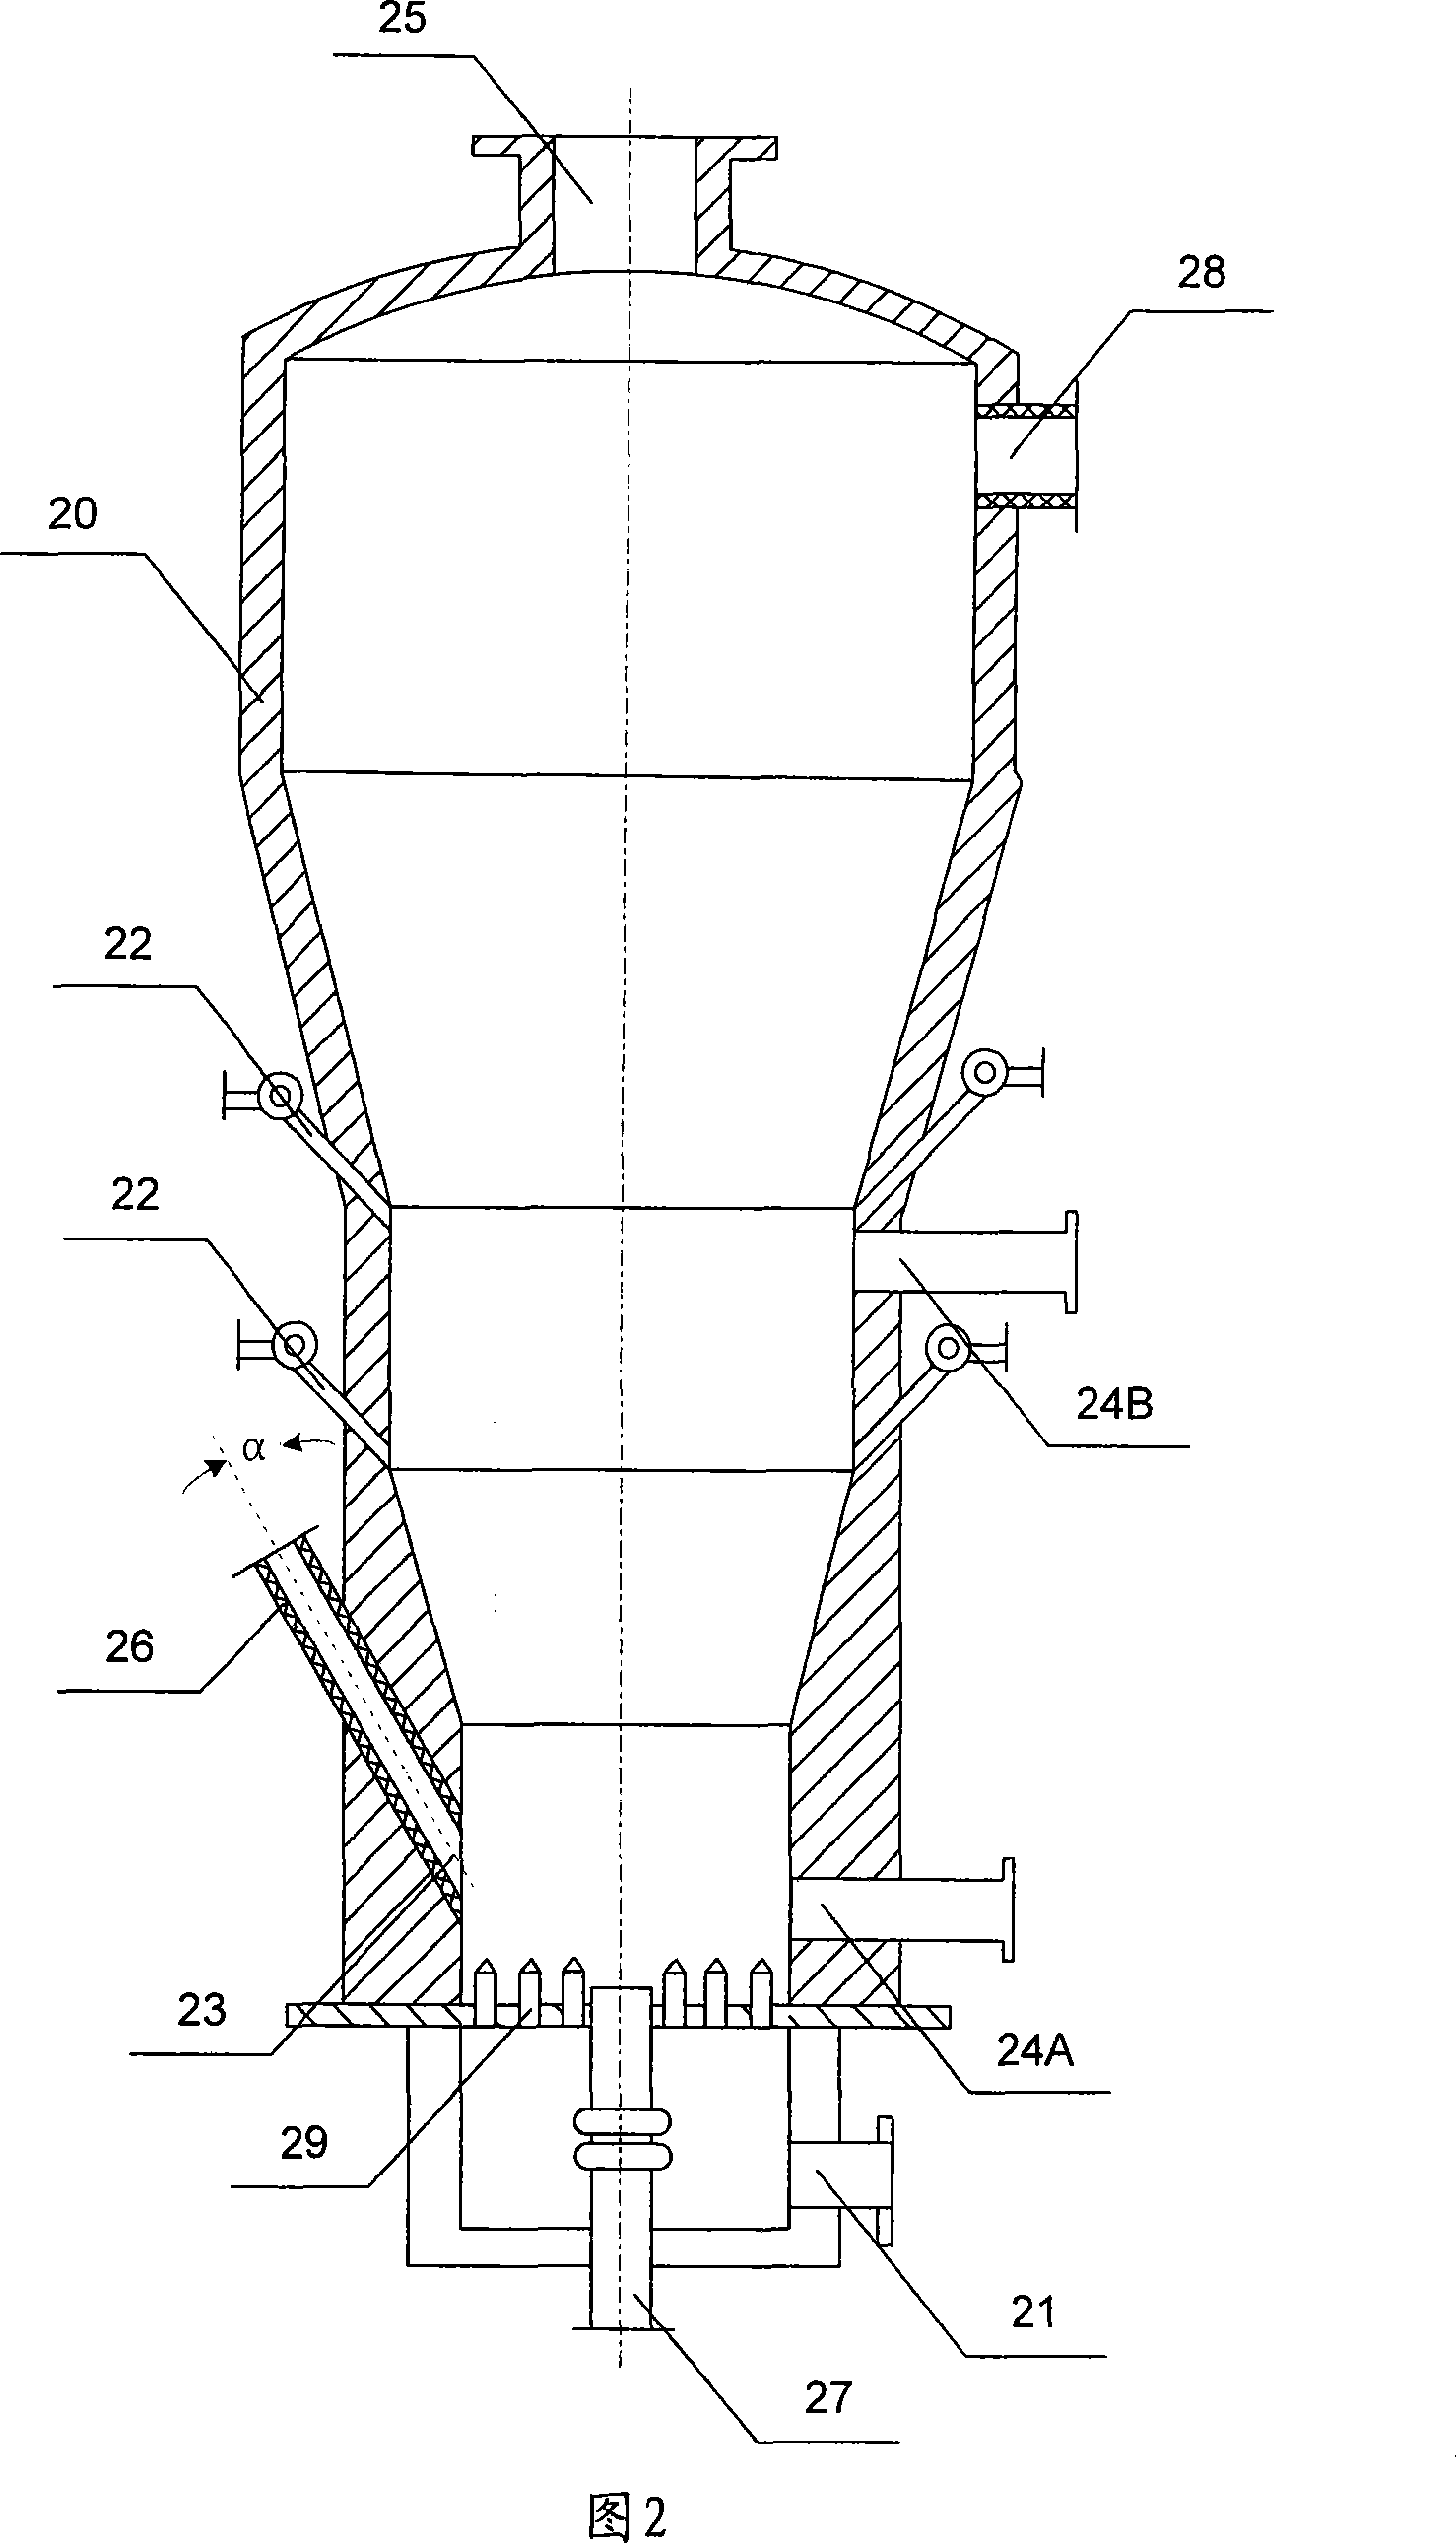 Circulating fluidized bed gas generator system